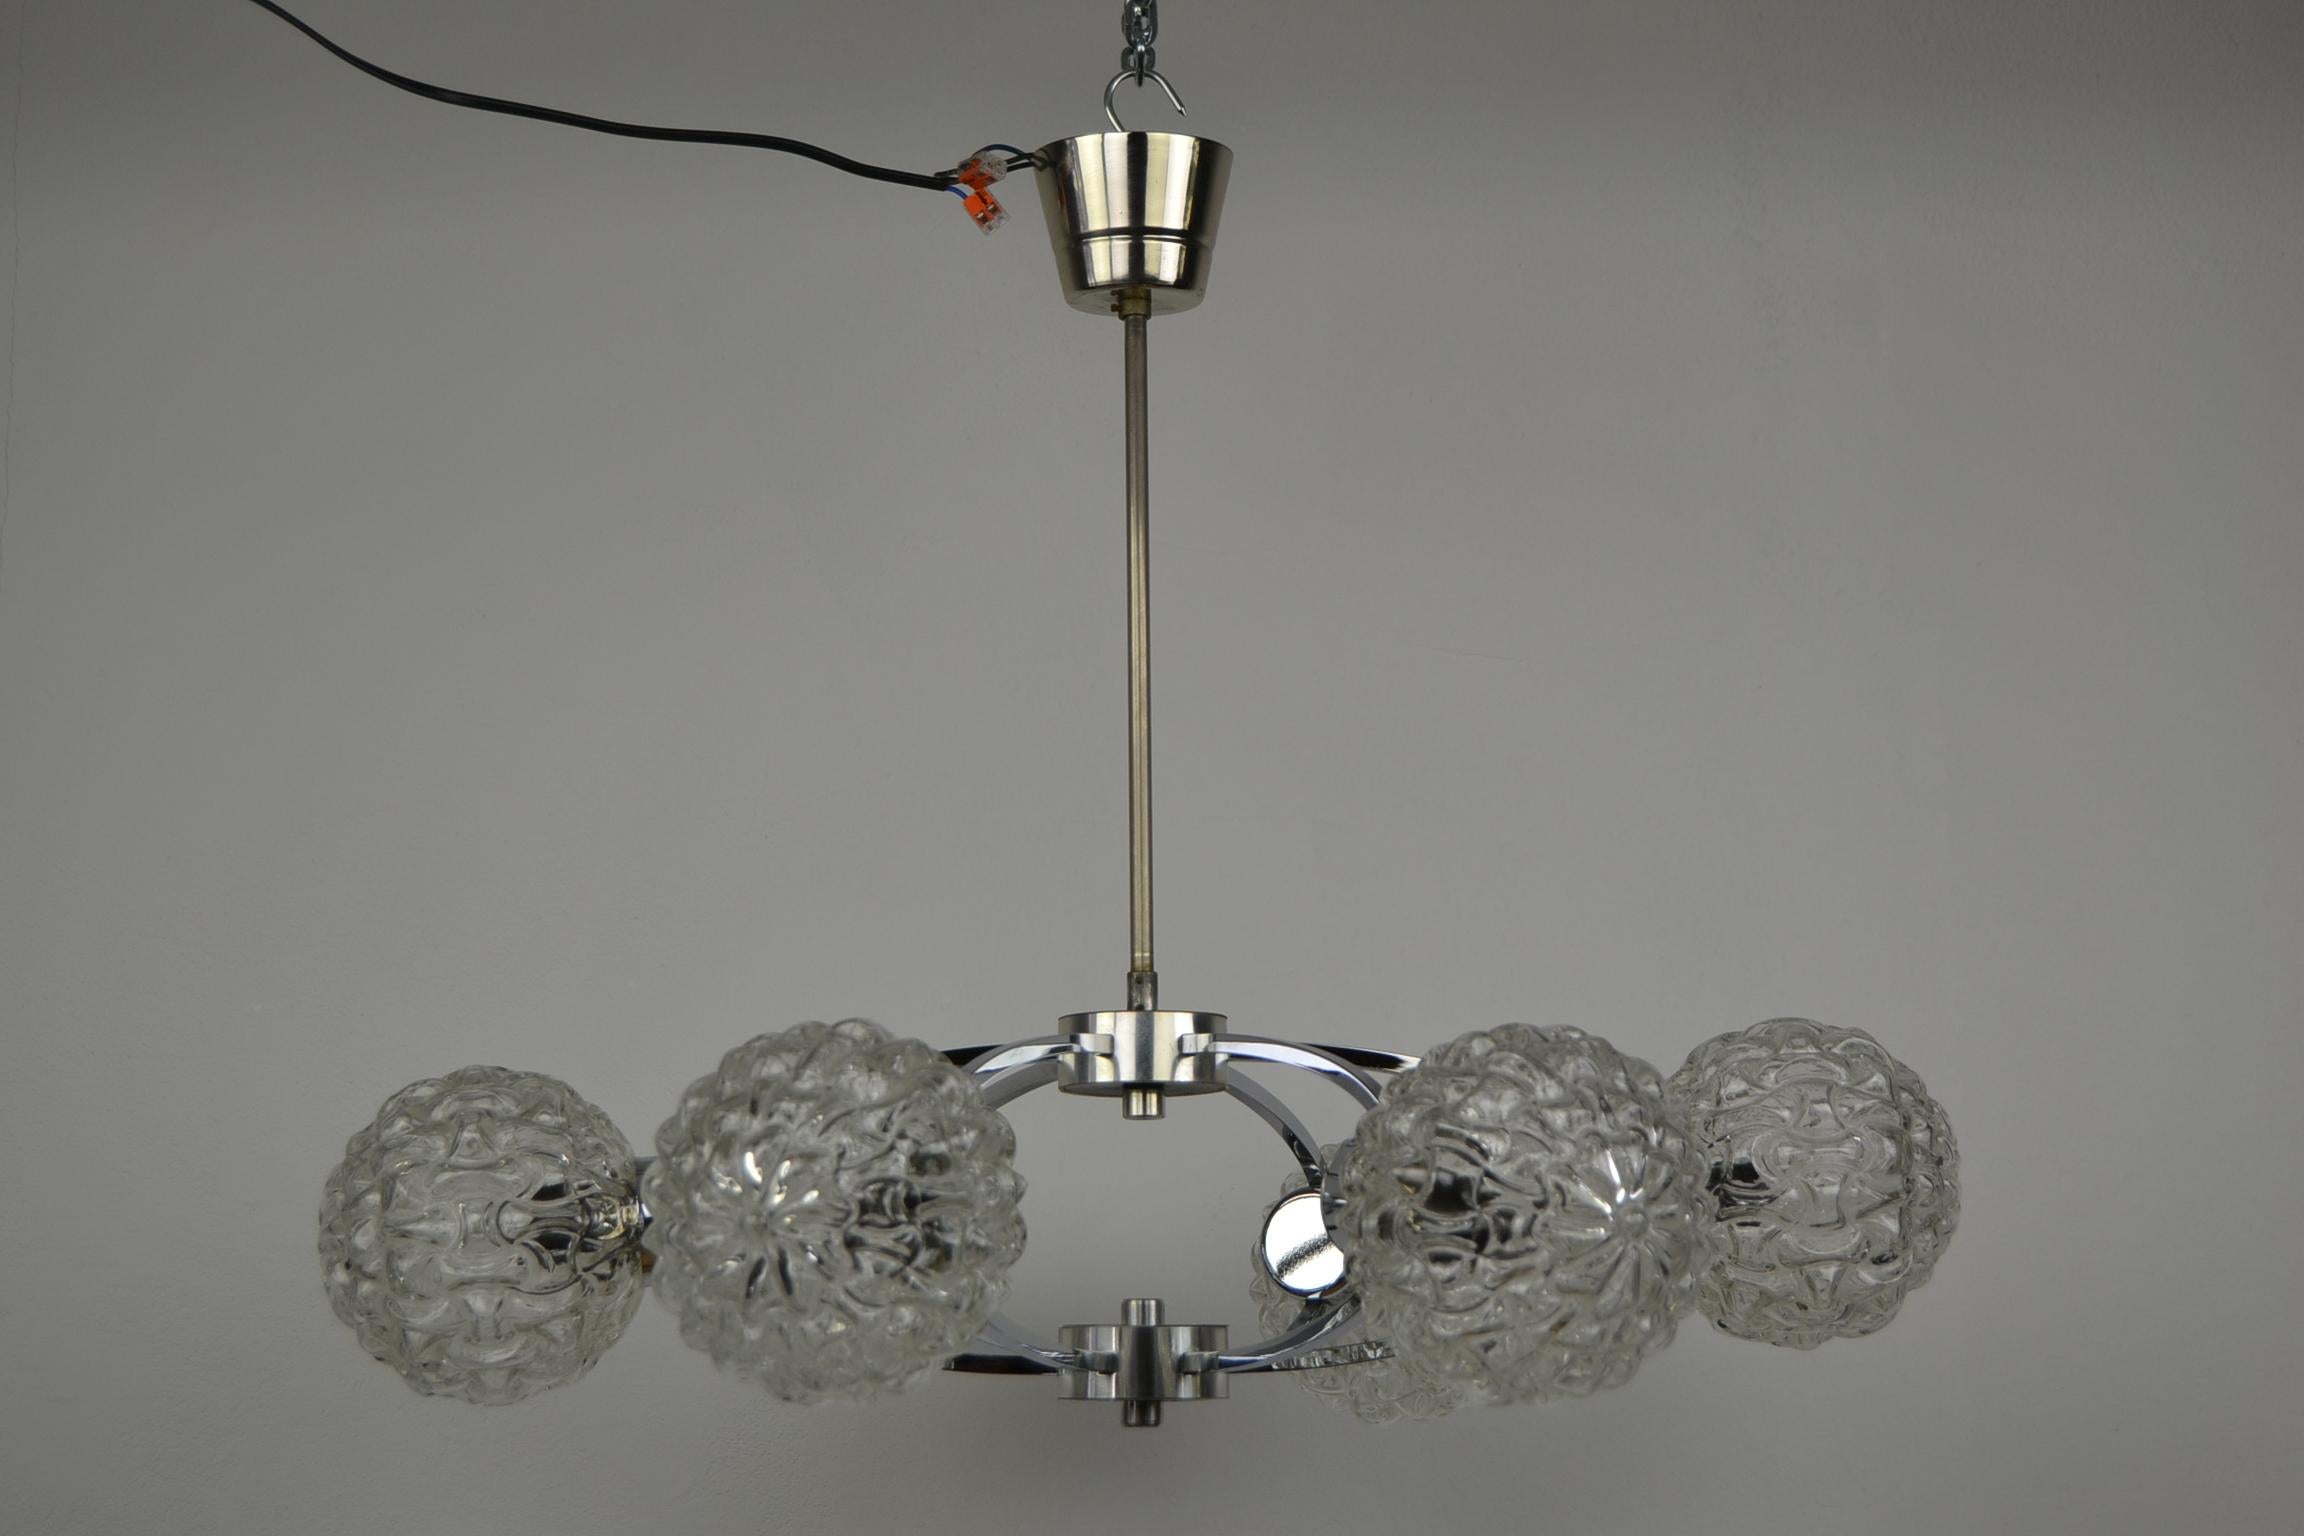 Space Age Atomic chandelier. 
A German Sputnik light made of chrome and glass which dates from the 1960s. This Orbital chandelier was made in Germany.
It's a Modern style ceiling light with still very beautiful shiny chrome and with 6 beautiful art